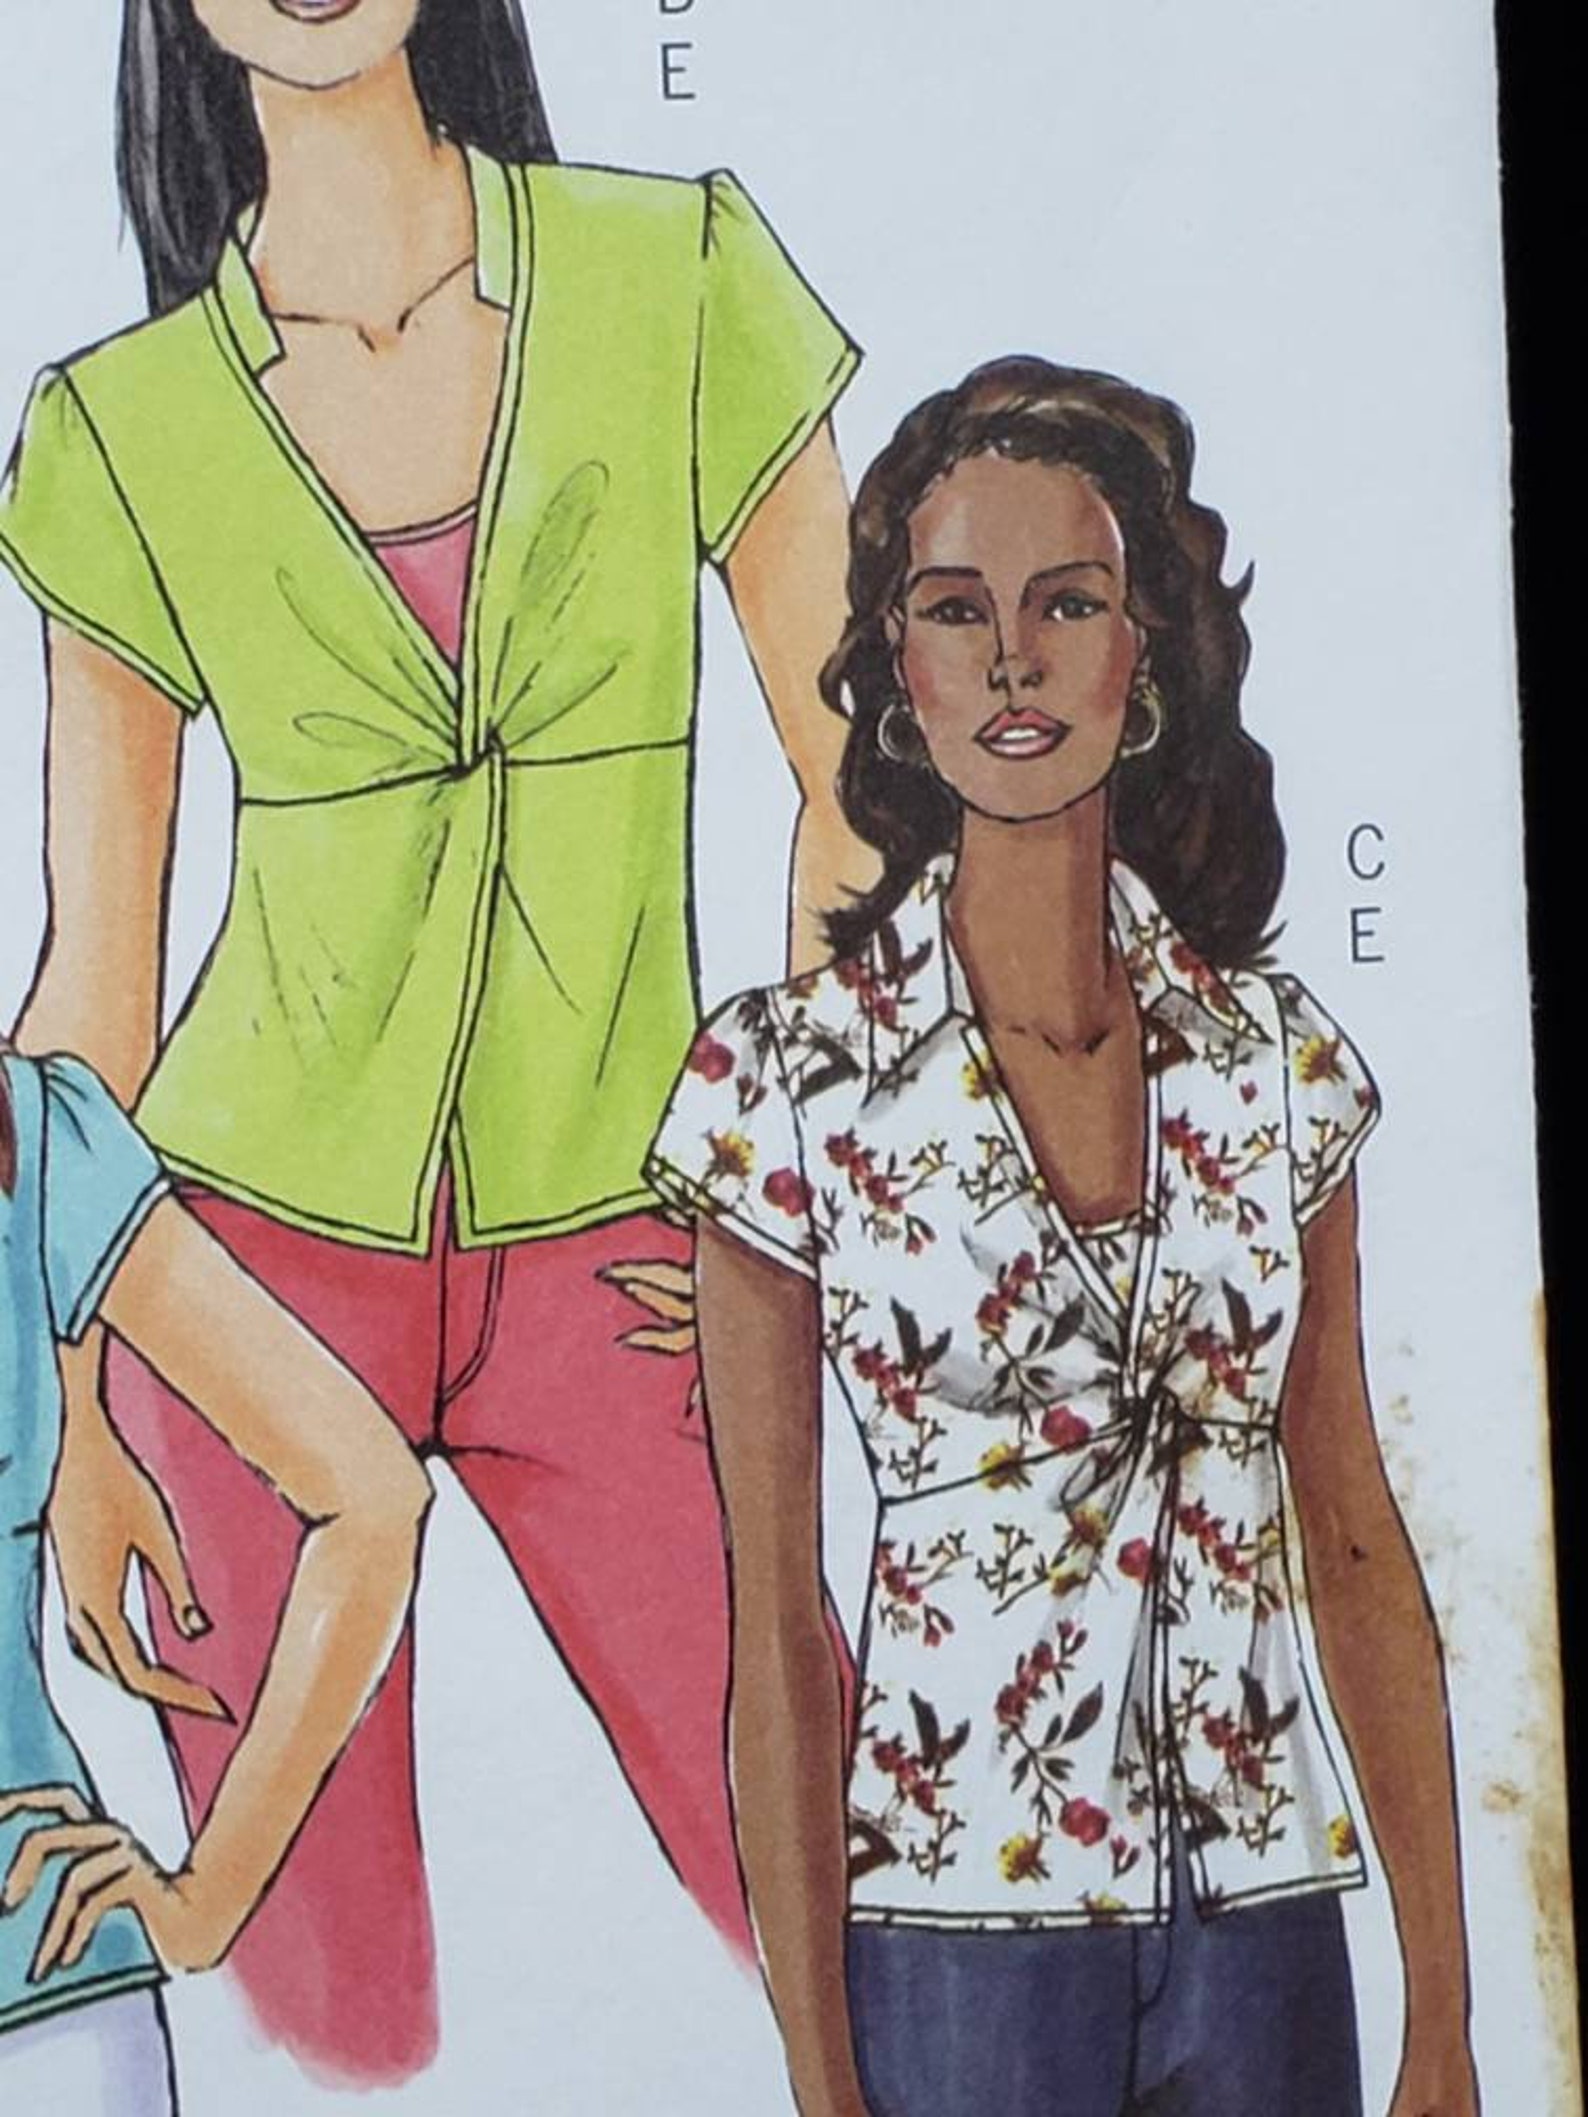 New Butterick Misses' Top And Camisole Sewing Pattern. - Etsy 日本